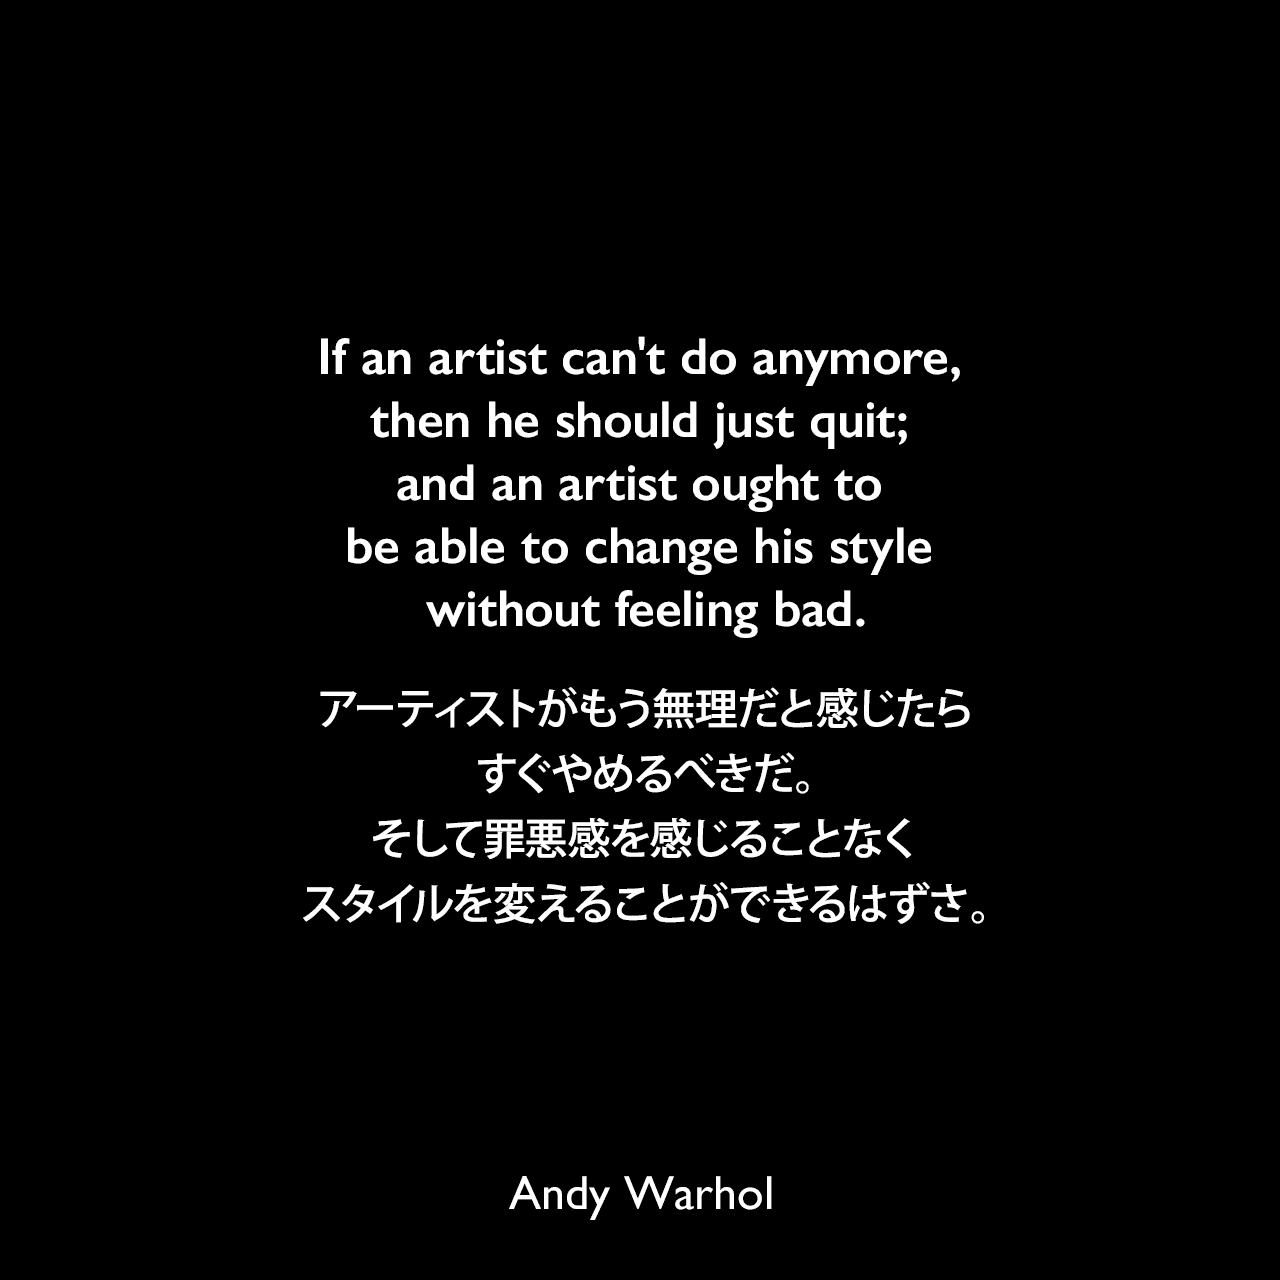 If an artist can't do anymore, then he should just quit; and an artist ought to be able to change his style without feeling bad.アーティストがもう無理だと感じたら、すぐやめるべきだ。そして罪悪感を感じることなくスタイルを変えることができるはずさ。- 1963年11月のARTnews誌のインタビューよりAndy Warhol